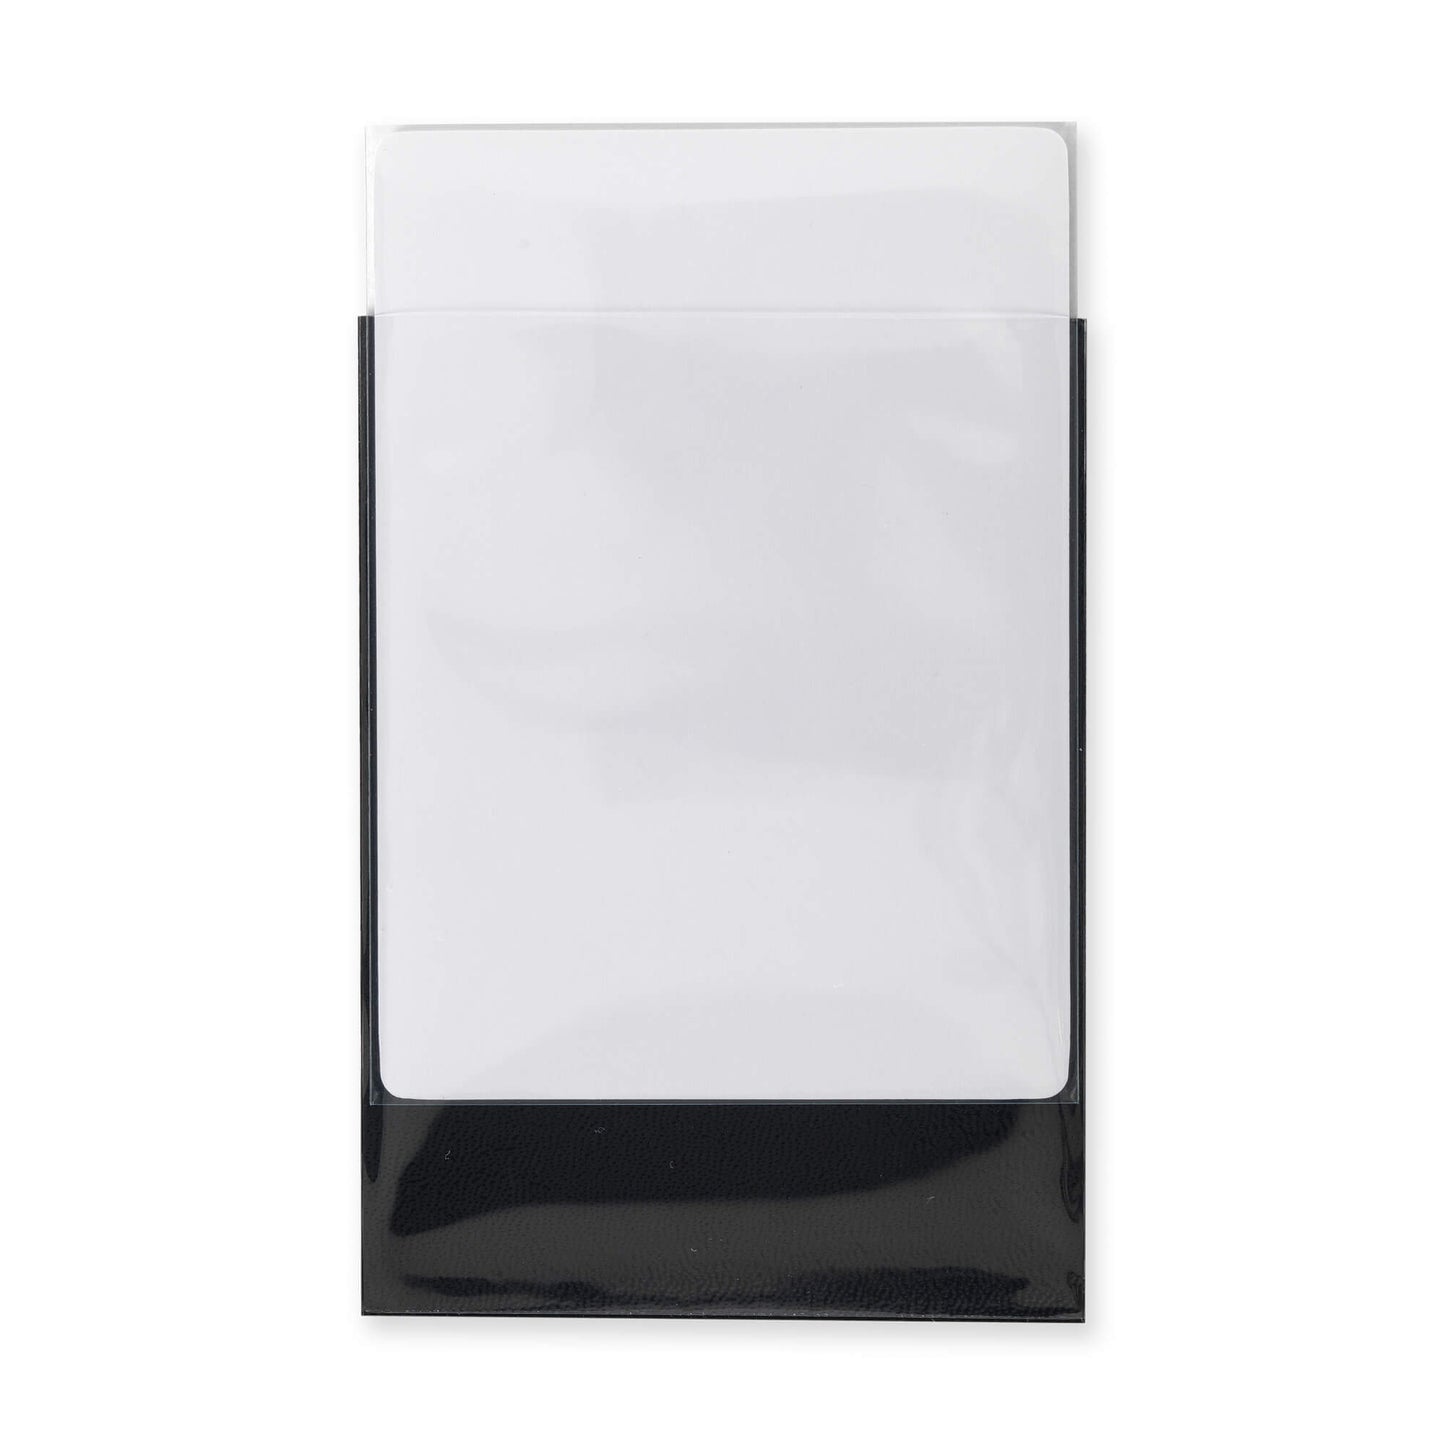 Vault X Exact Fit Card Sleeves - 100 Pack